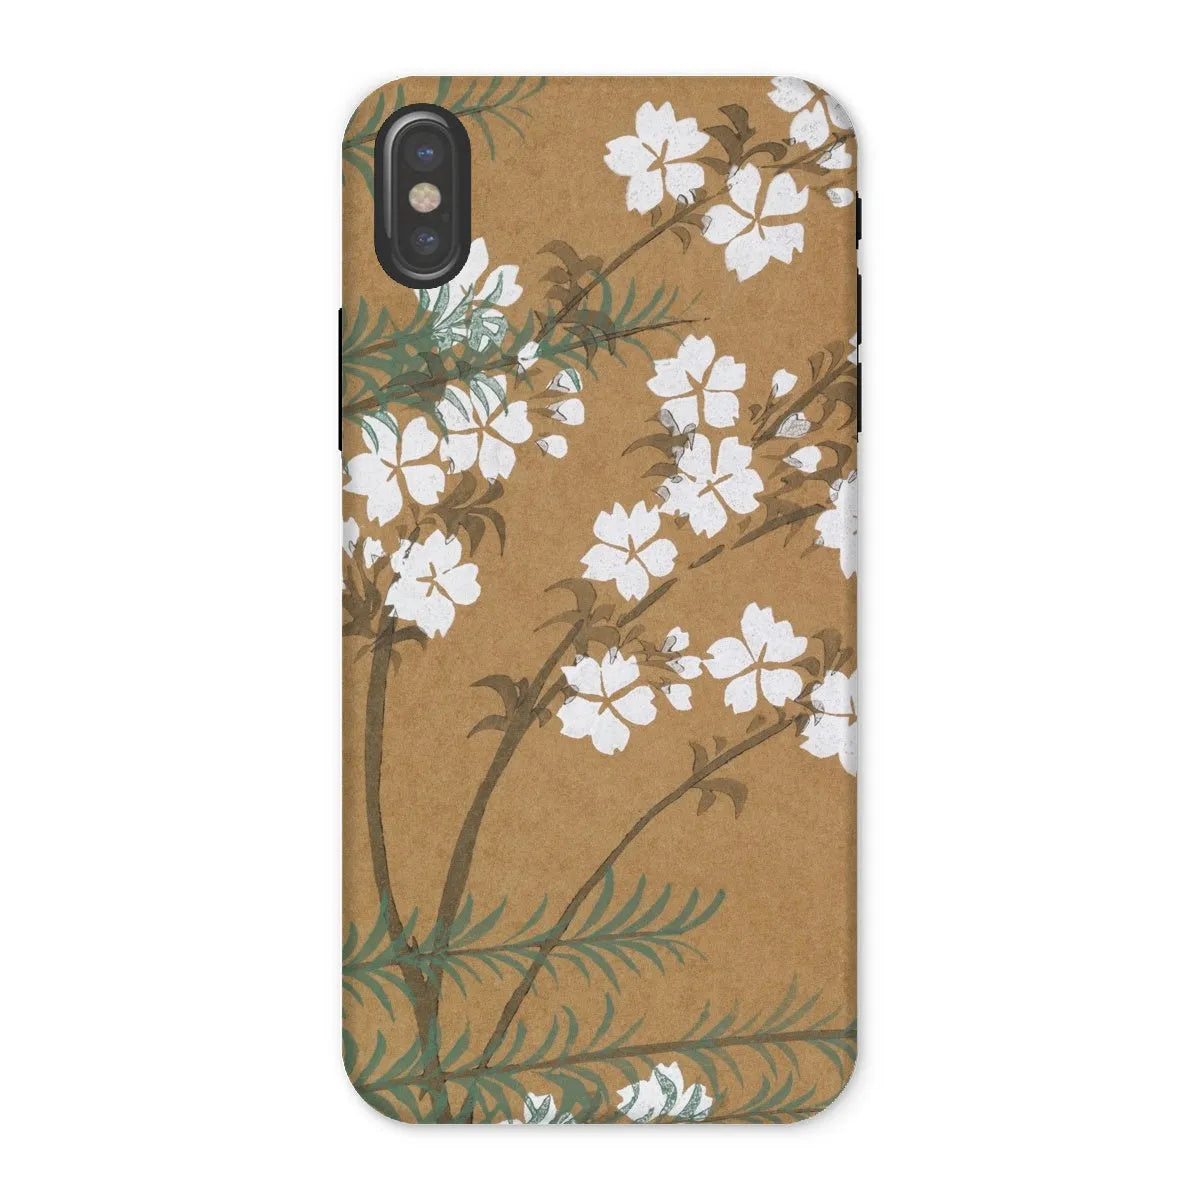 Blossoms From Momoyogusa Floral Phone Case - Kamisaka Sekka - Iphone x / Matte - Mobile Phone Cases - Aesthetic Art